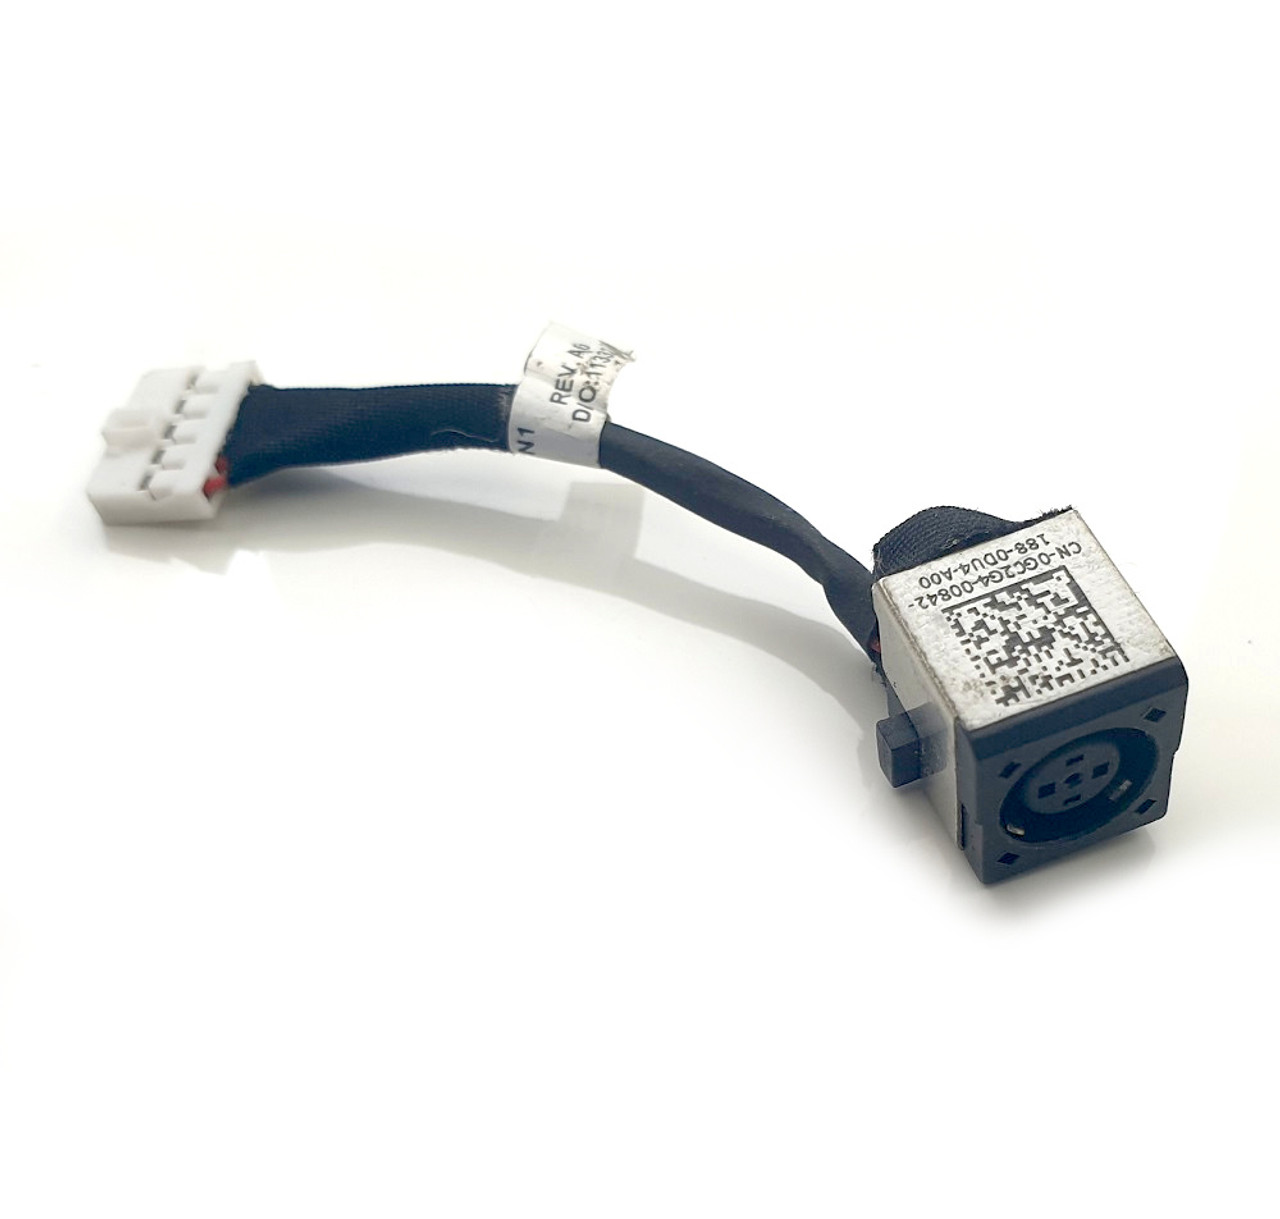 DC IN Power Jack Socket With Cable Wire Harness For DELL VOSTRO V130 V131 V3330 50.4IM02.101 0GC2G4 Laptop Notebook